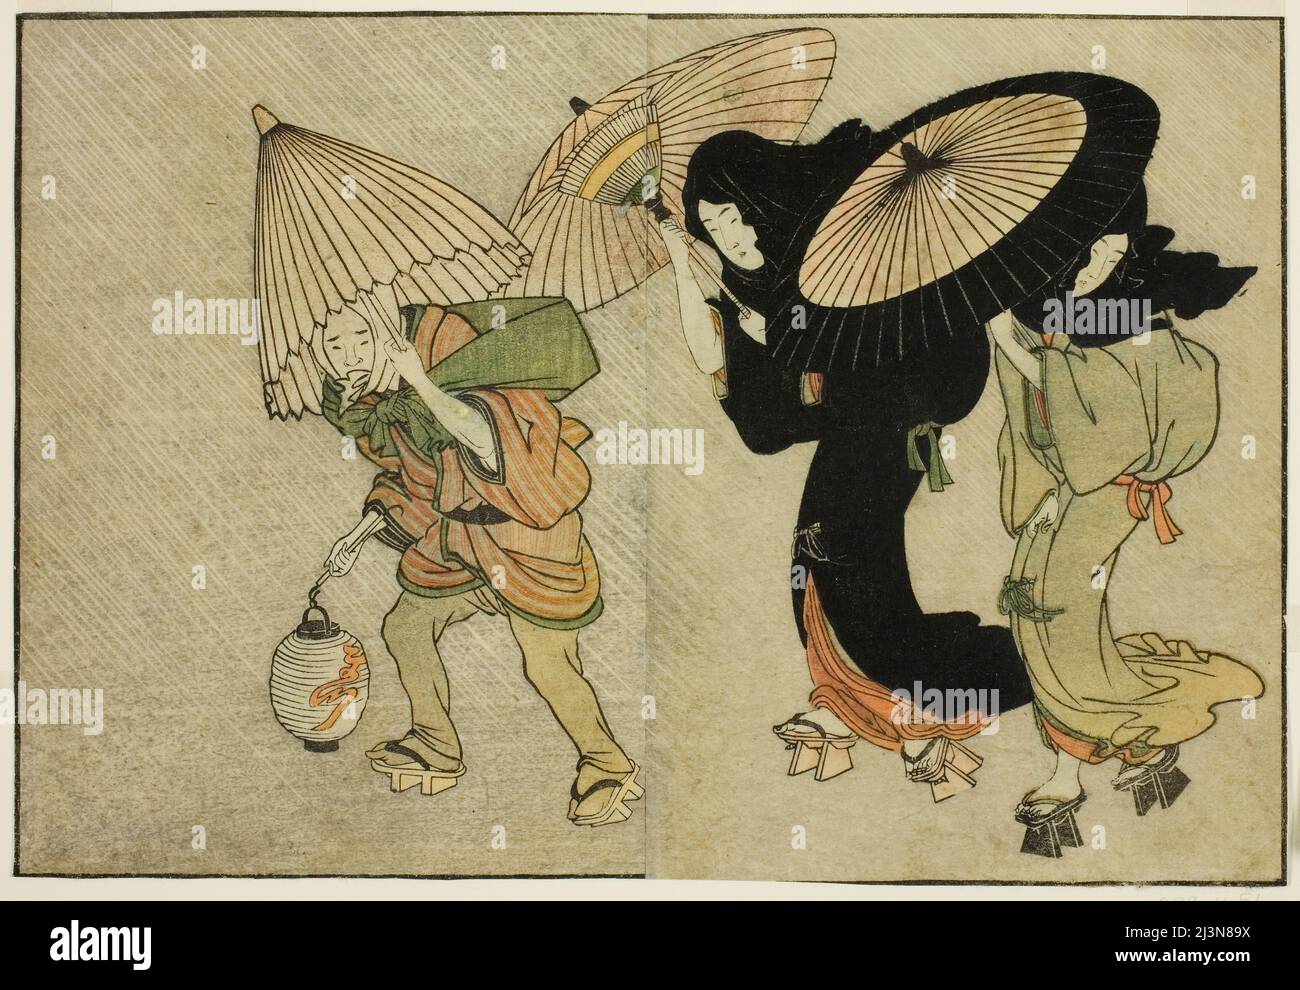 Two Women and Attendant Caught in a Storm, from the illustrated book &quot;Picture Book: Flowers of the Four Seasons (Ehon shiki no hana),&quot; vol. 2, Japan, New Year, 1801. Stock Photo